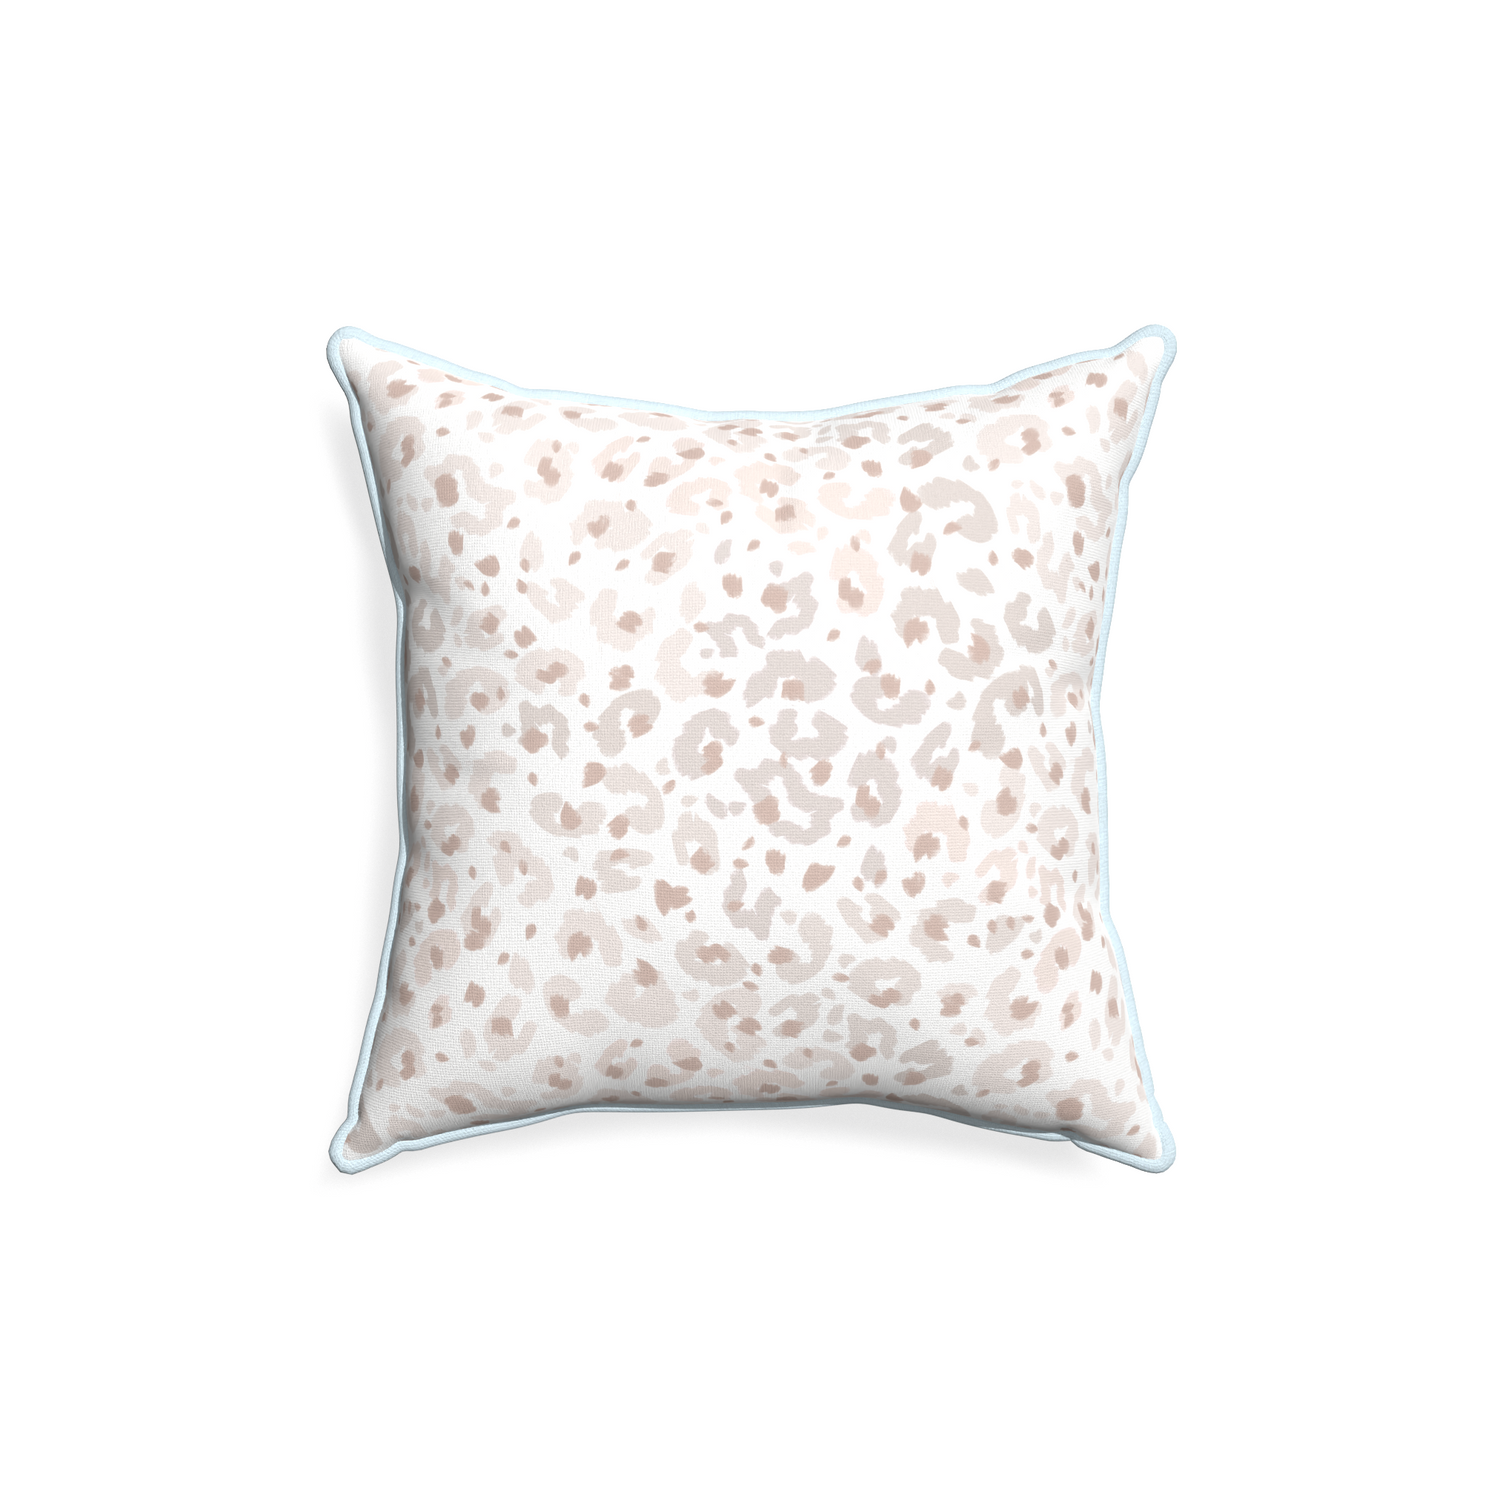 18-square rosie custom pillow with powder piping on white background